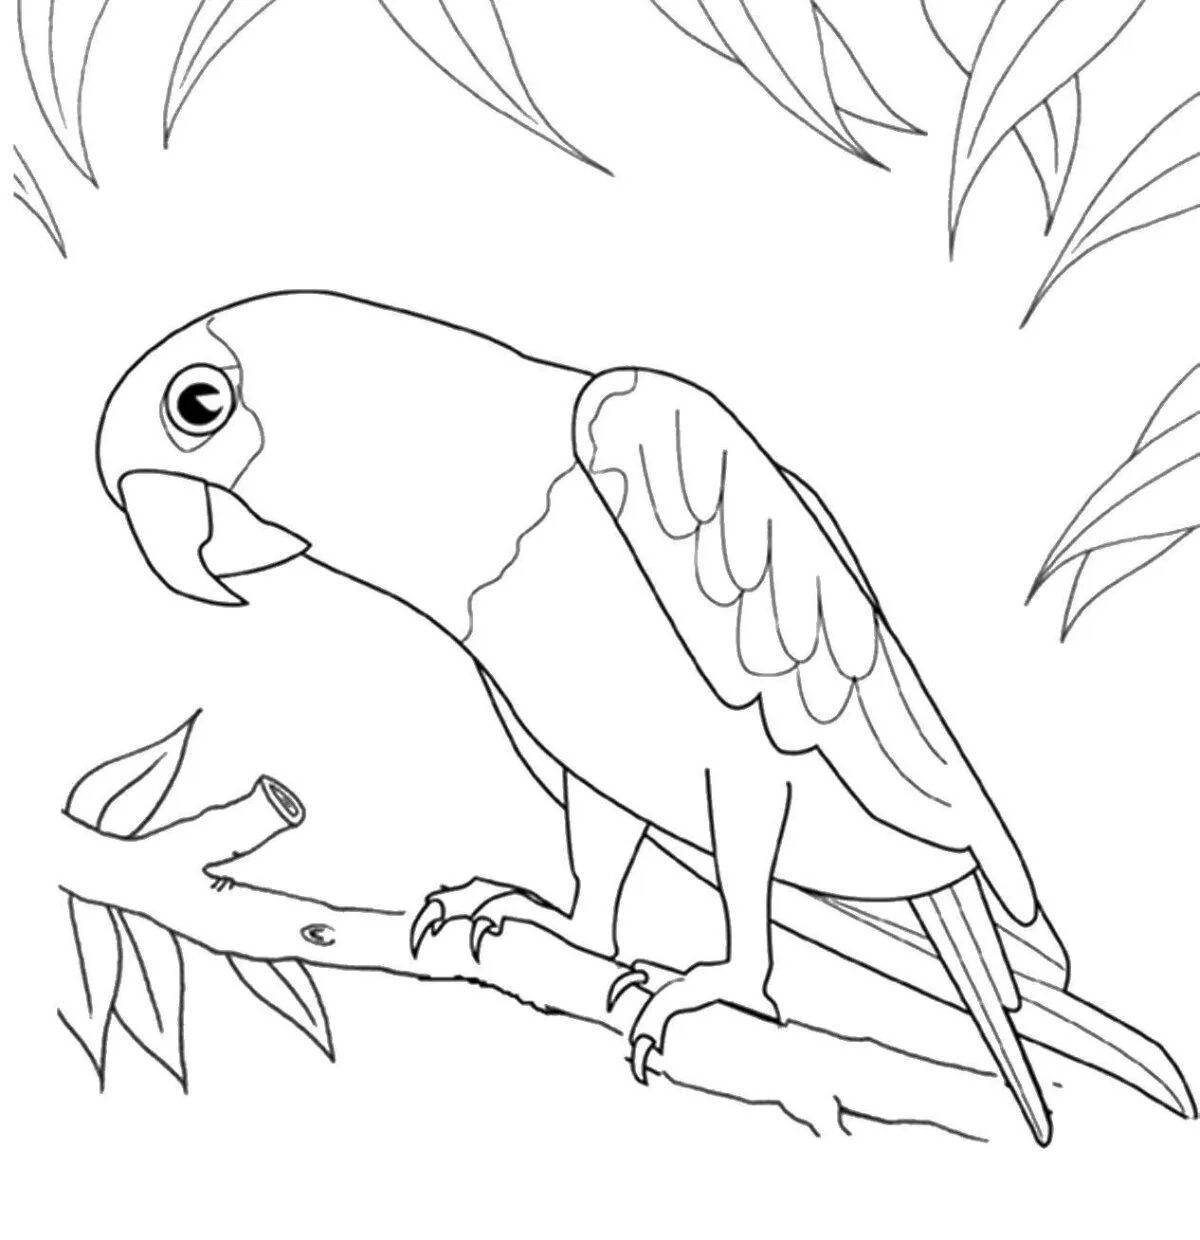 Funny parrot drawing for kids